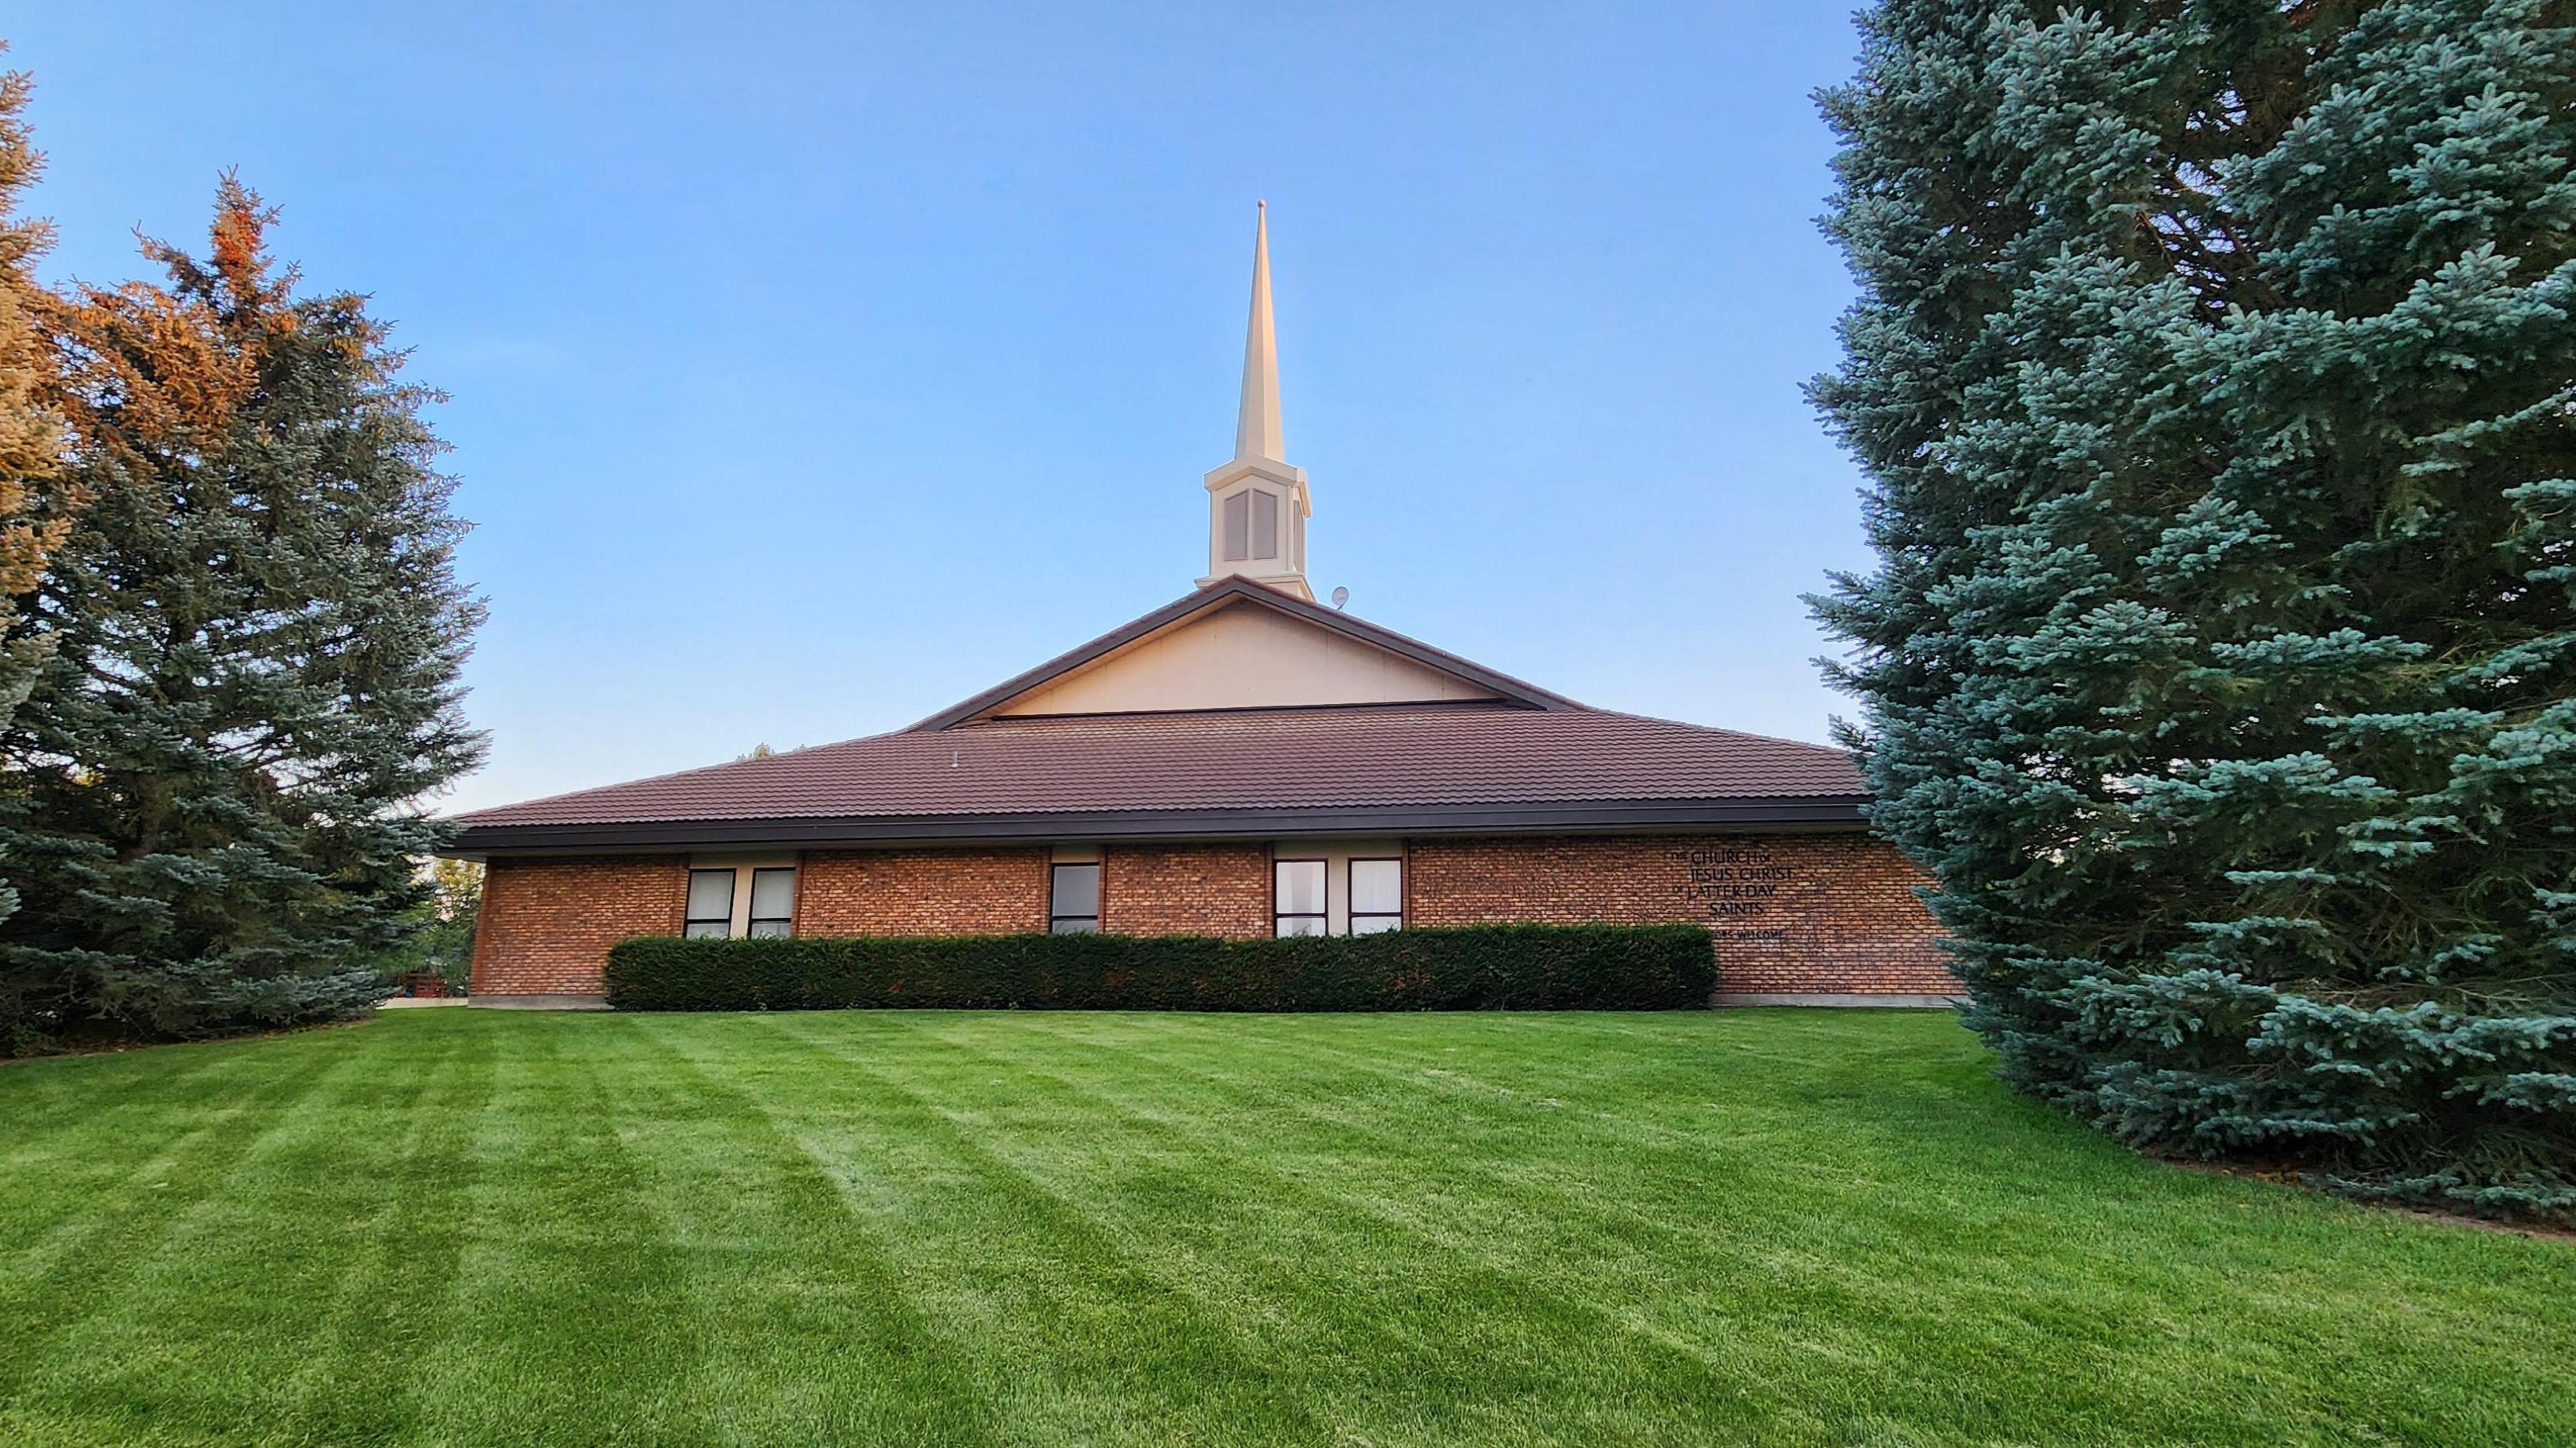 Gary Drive Building of The Church of Jesus Christ of Latter-day Saints located at 315 Gary Dr in Rexburg, Idaho.  This view is from the north of the building.